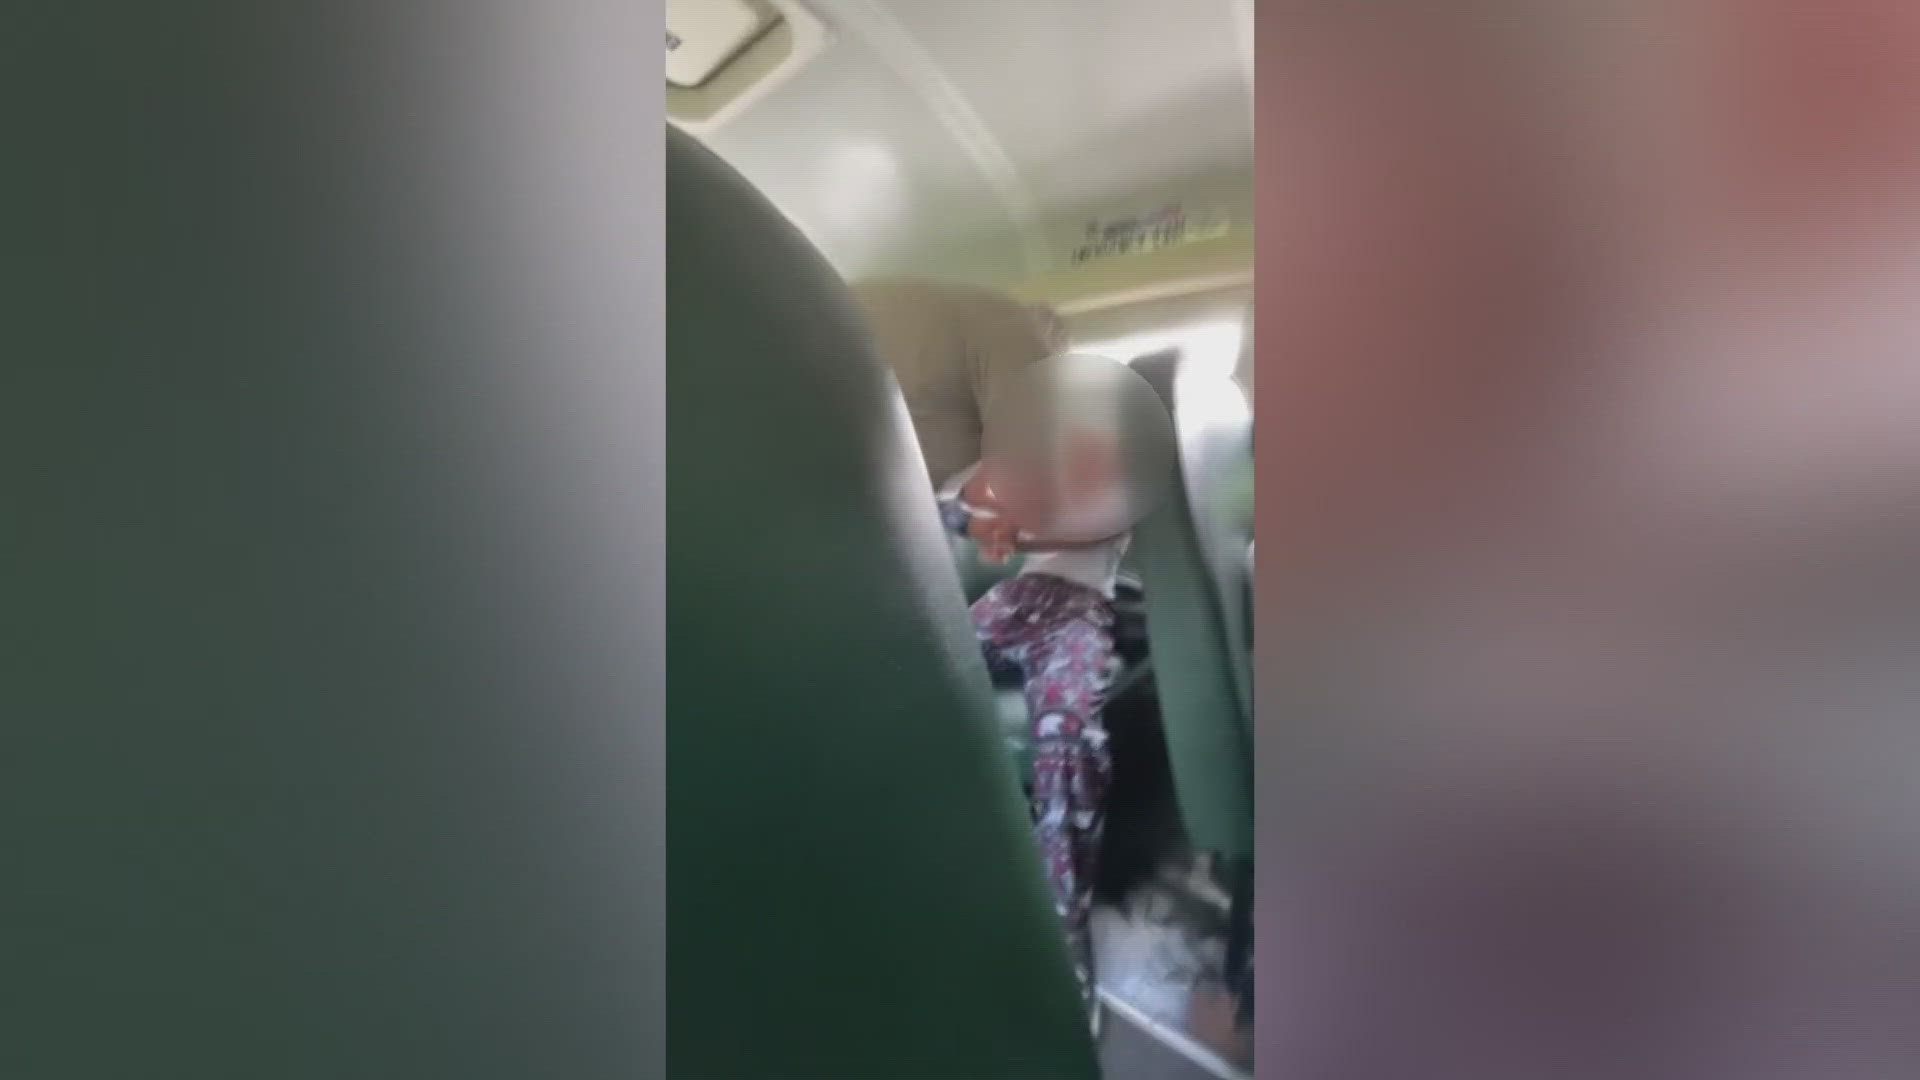 A video posted on Facebook last week shows a bus driver grabbing a girl by the wrists and pulling her out of her seat.